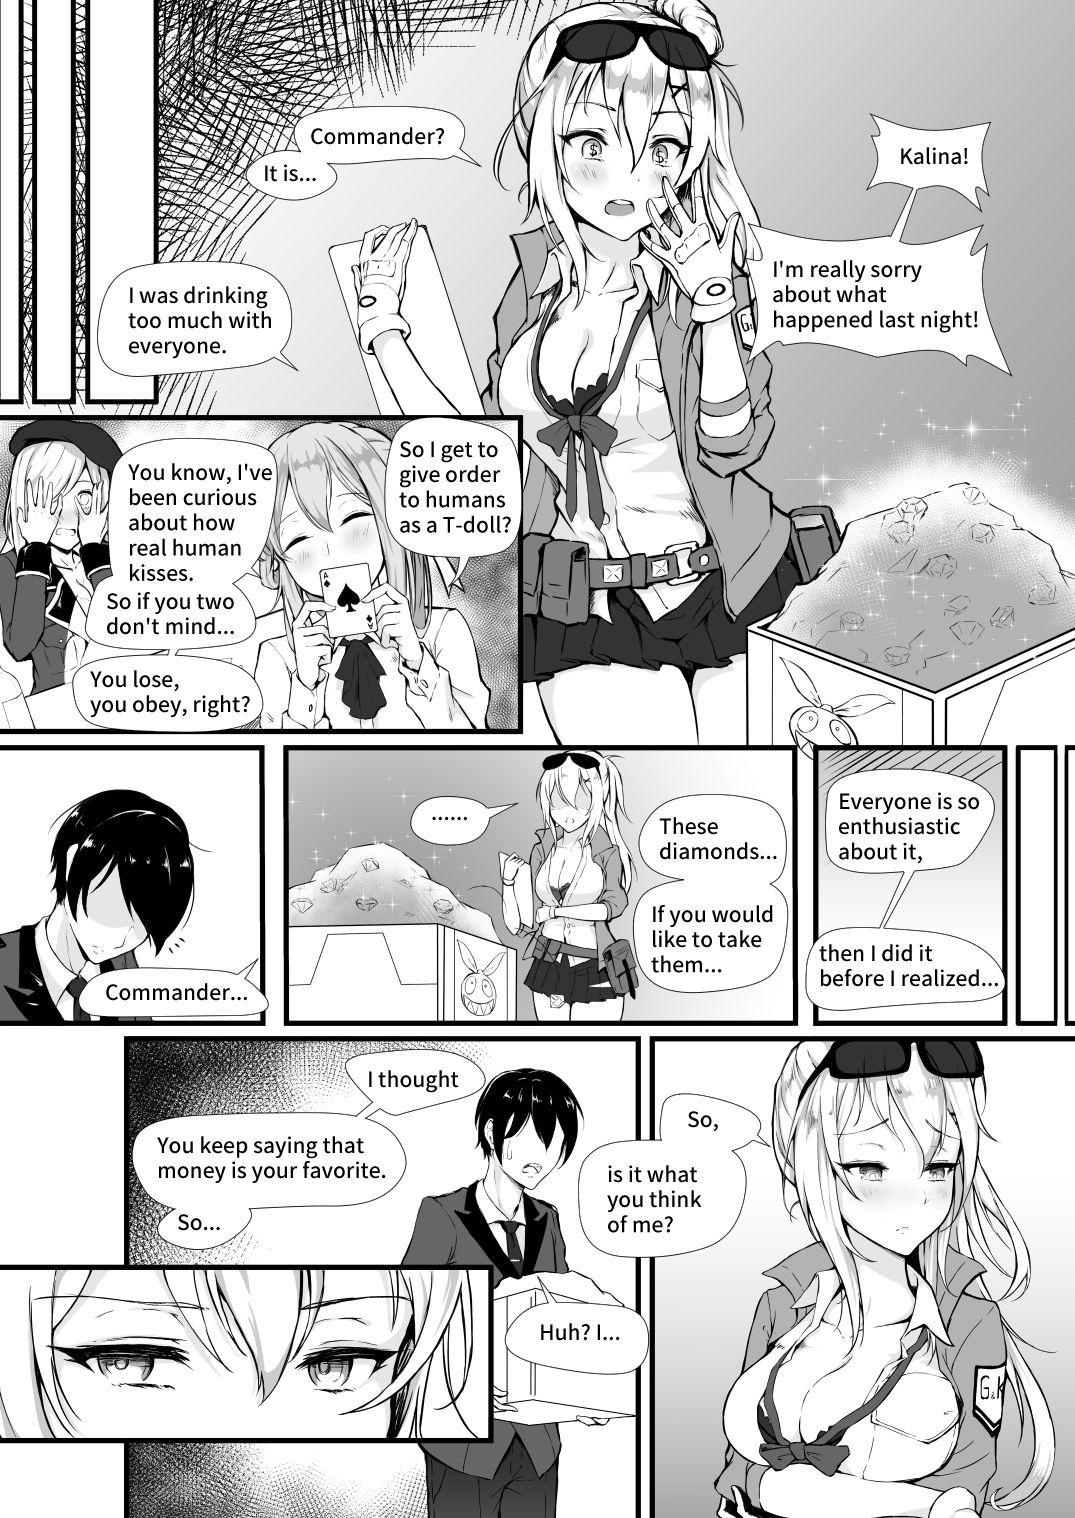 Stretch How Many Diamonds a Kiss Worth? - Girls frontline Homemade - Page 5